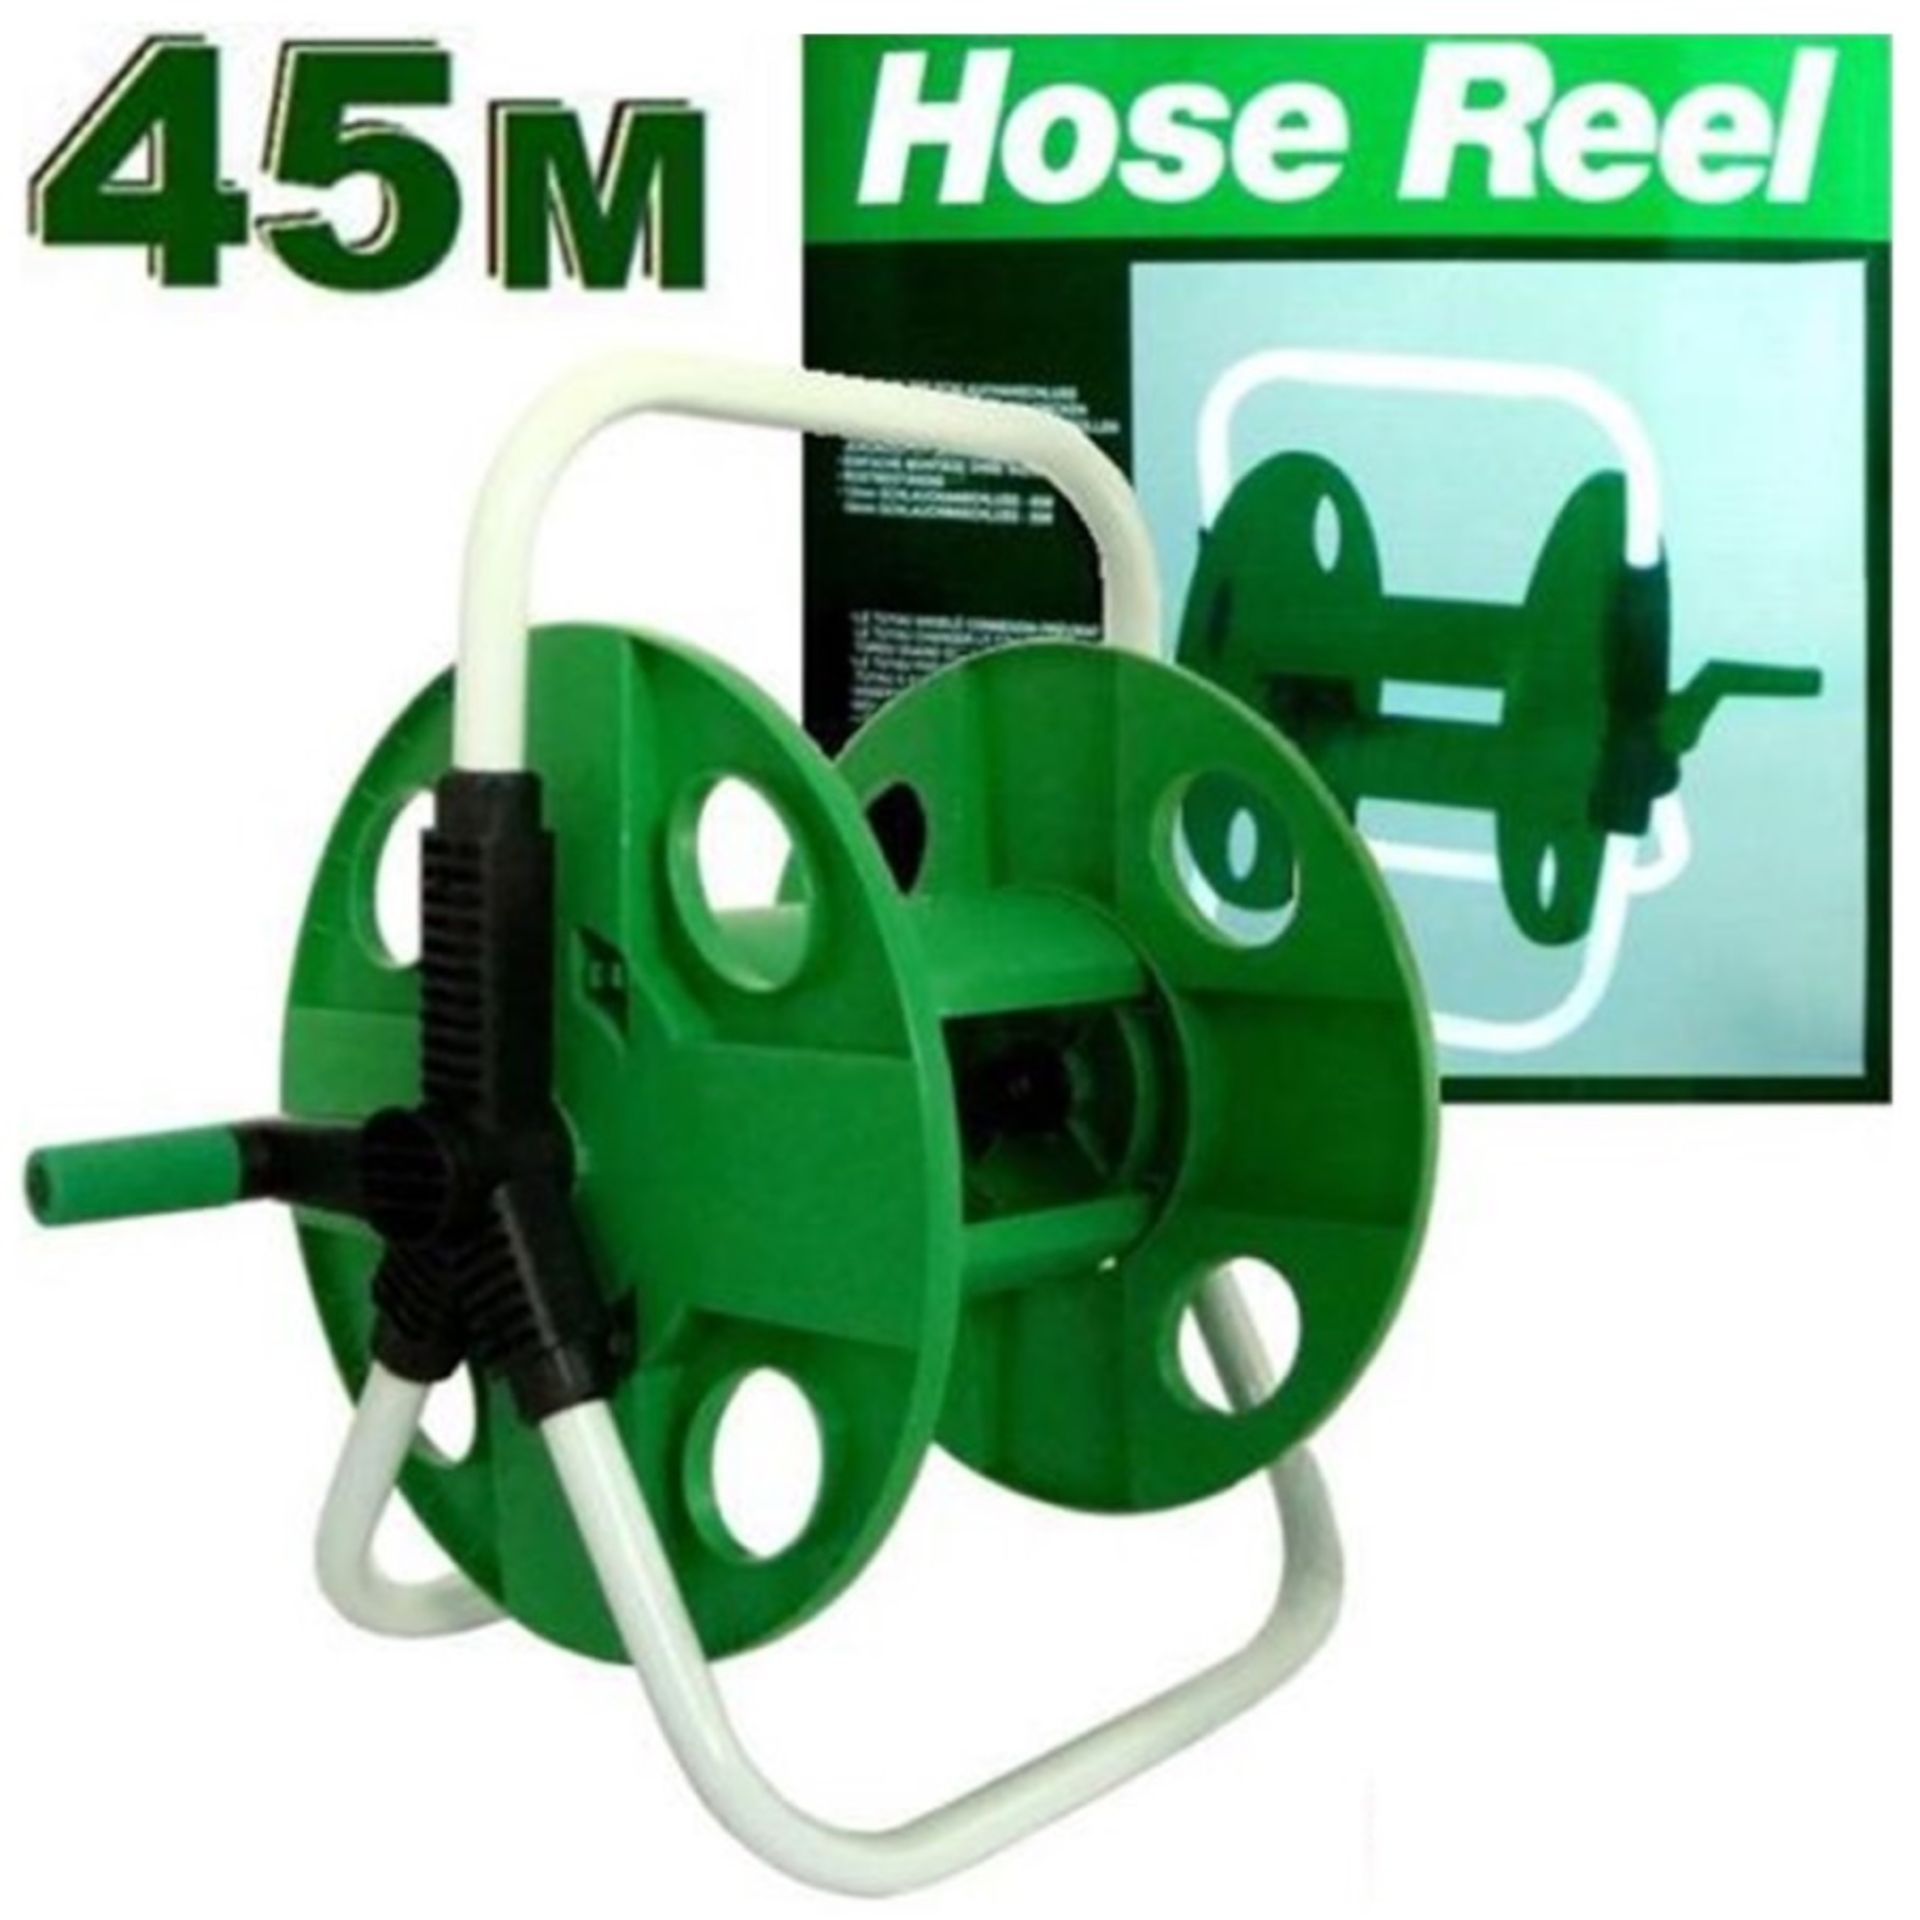 Green Colour Reel with Hose Connectors - Free Standing or suitable to Fit on Wall with Easy and